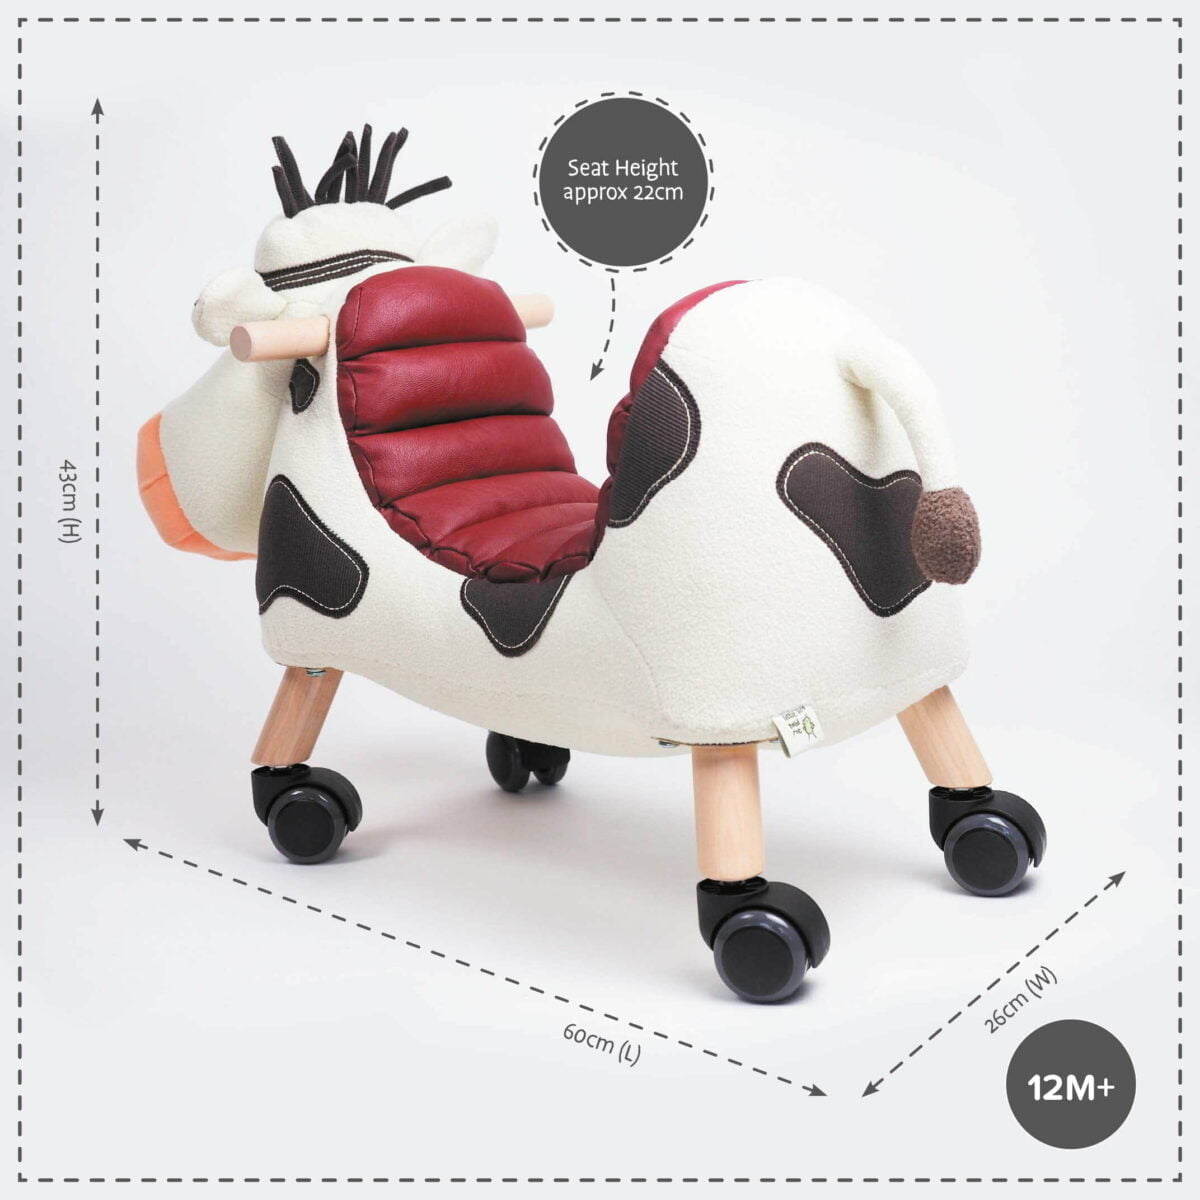 Product dimensions displayed for Moobert Cow Ride On Toy